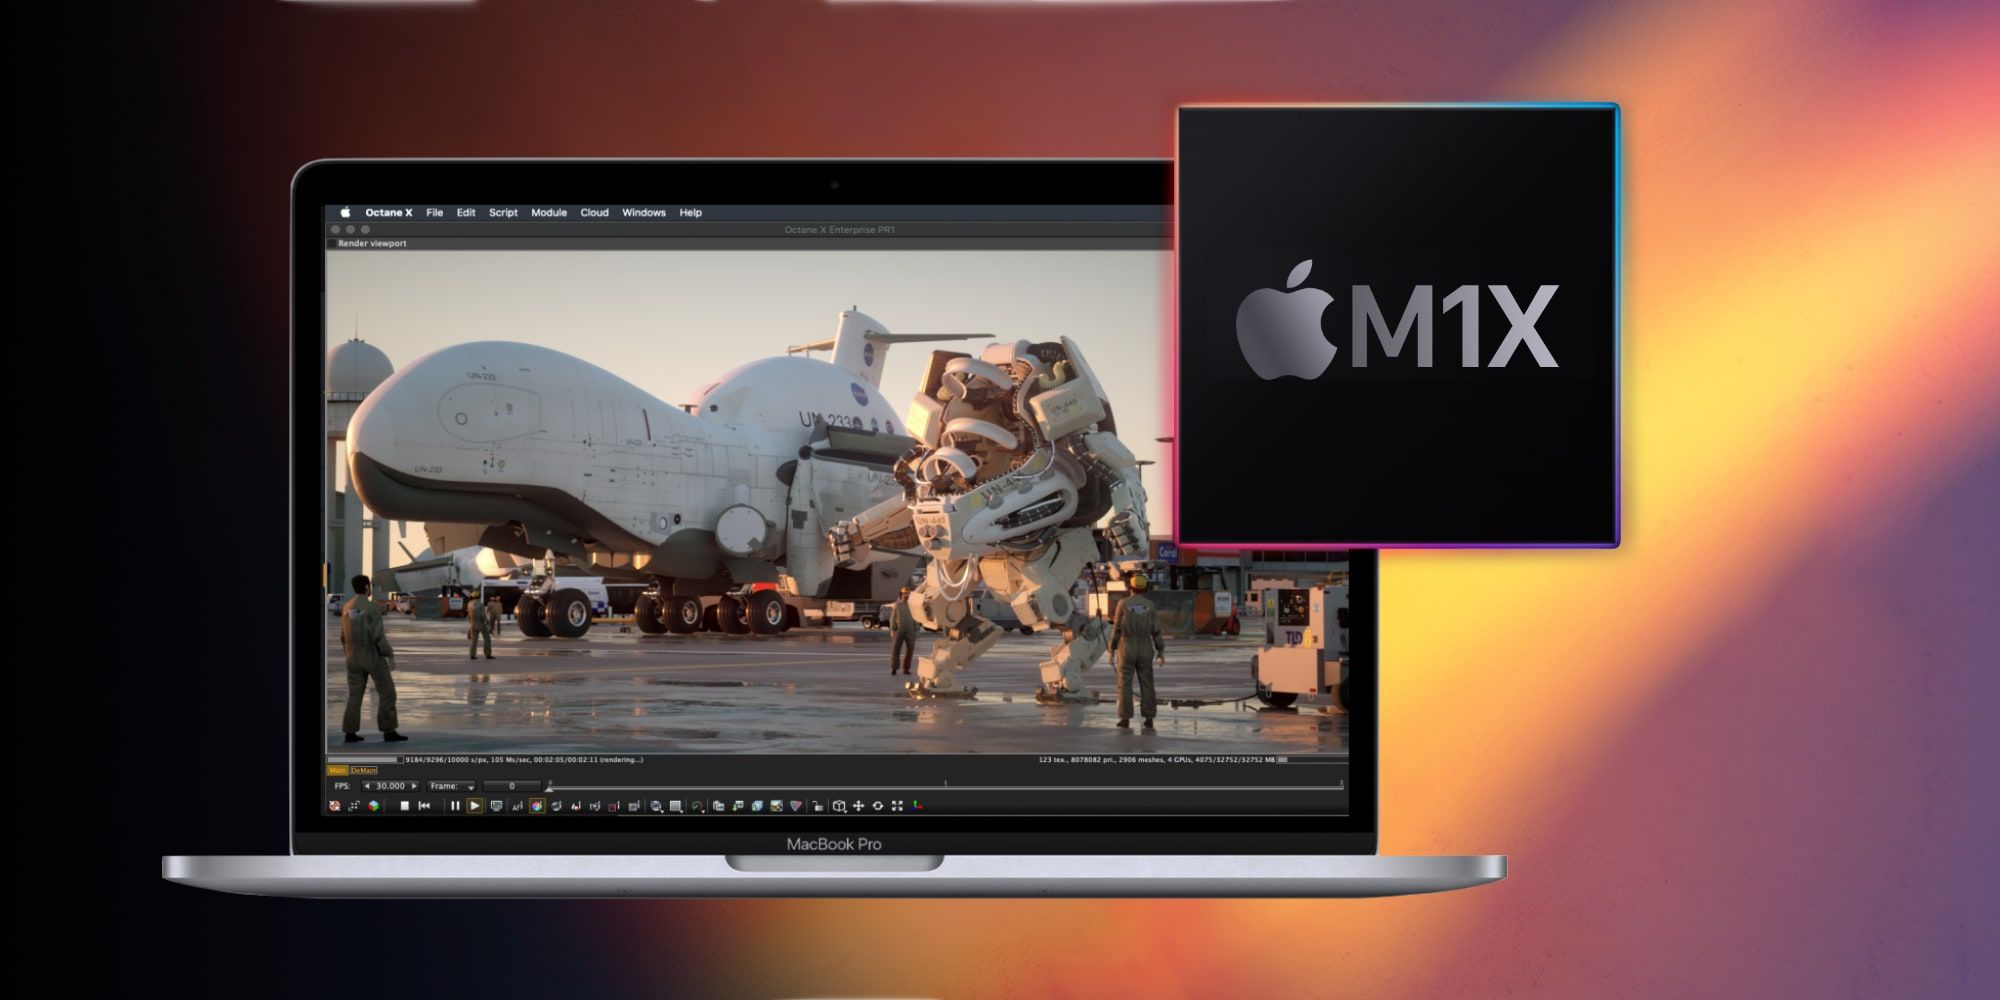 What You Should Expect From An M1X MacBook Pro